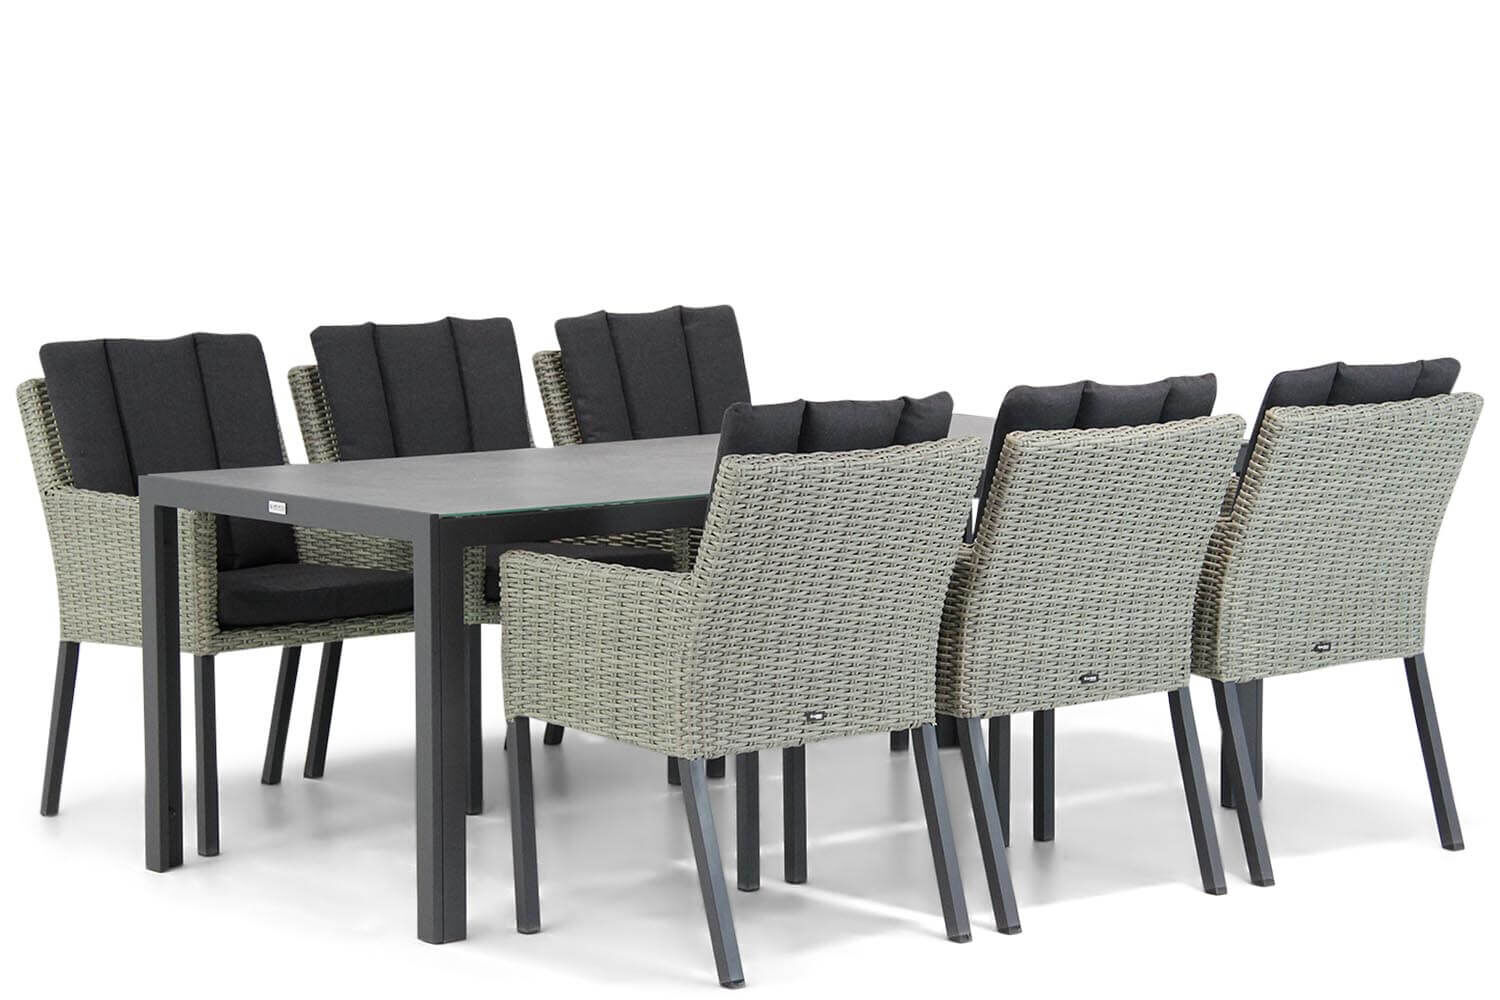 Garden Collections Oxbow/Varano 210 cm dining tuinset 7-delig